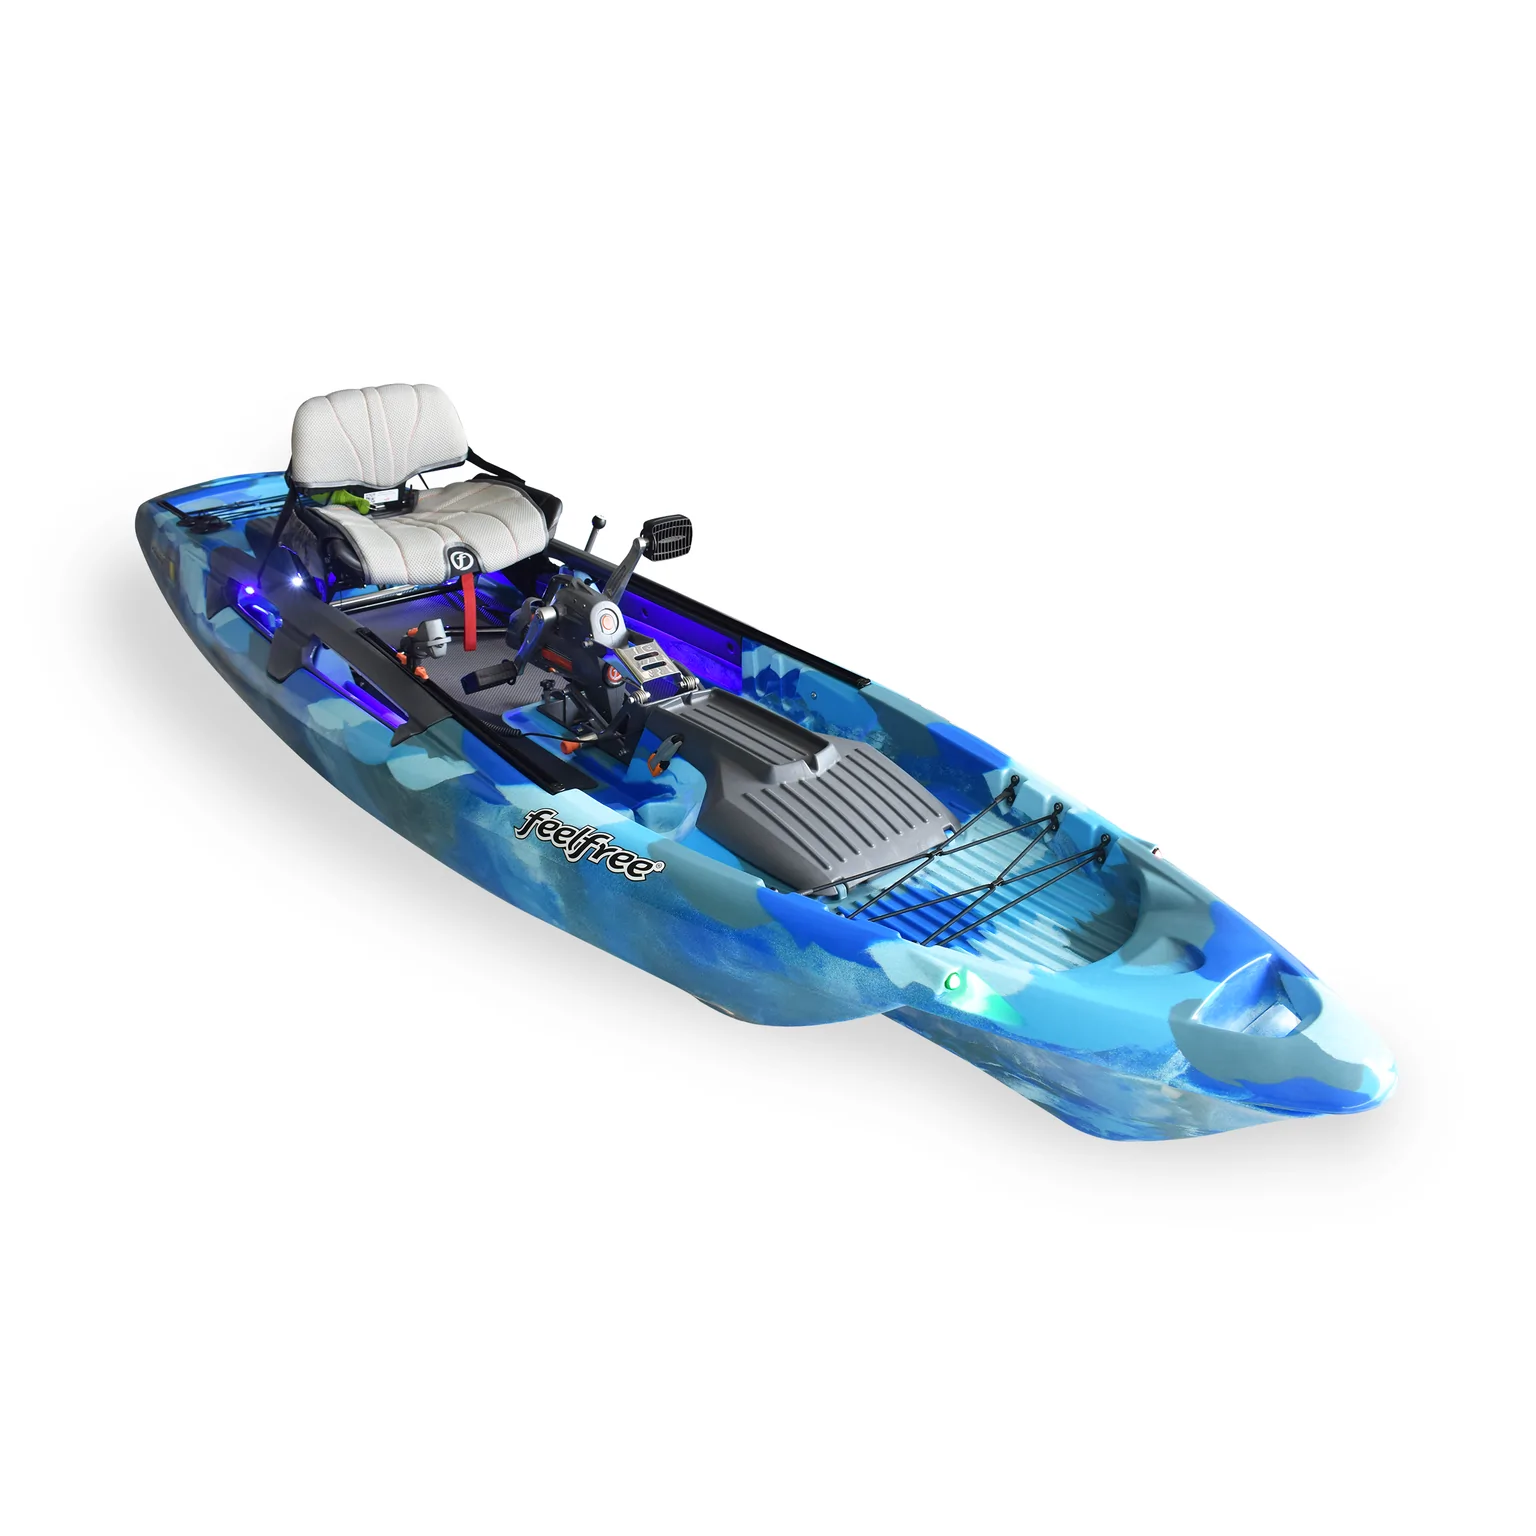 Knowledge Center: Storing your Feelfree Kayak – Feelfree US